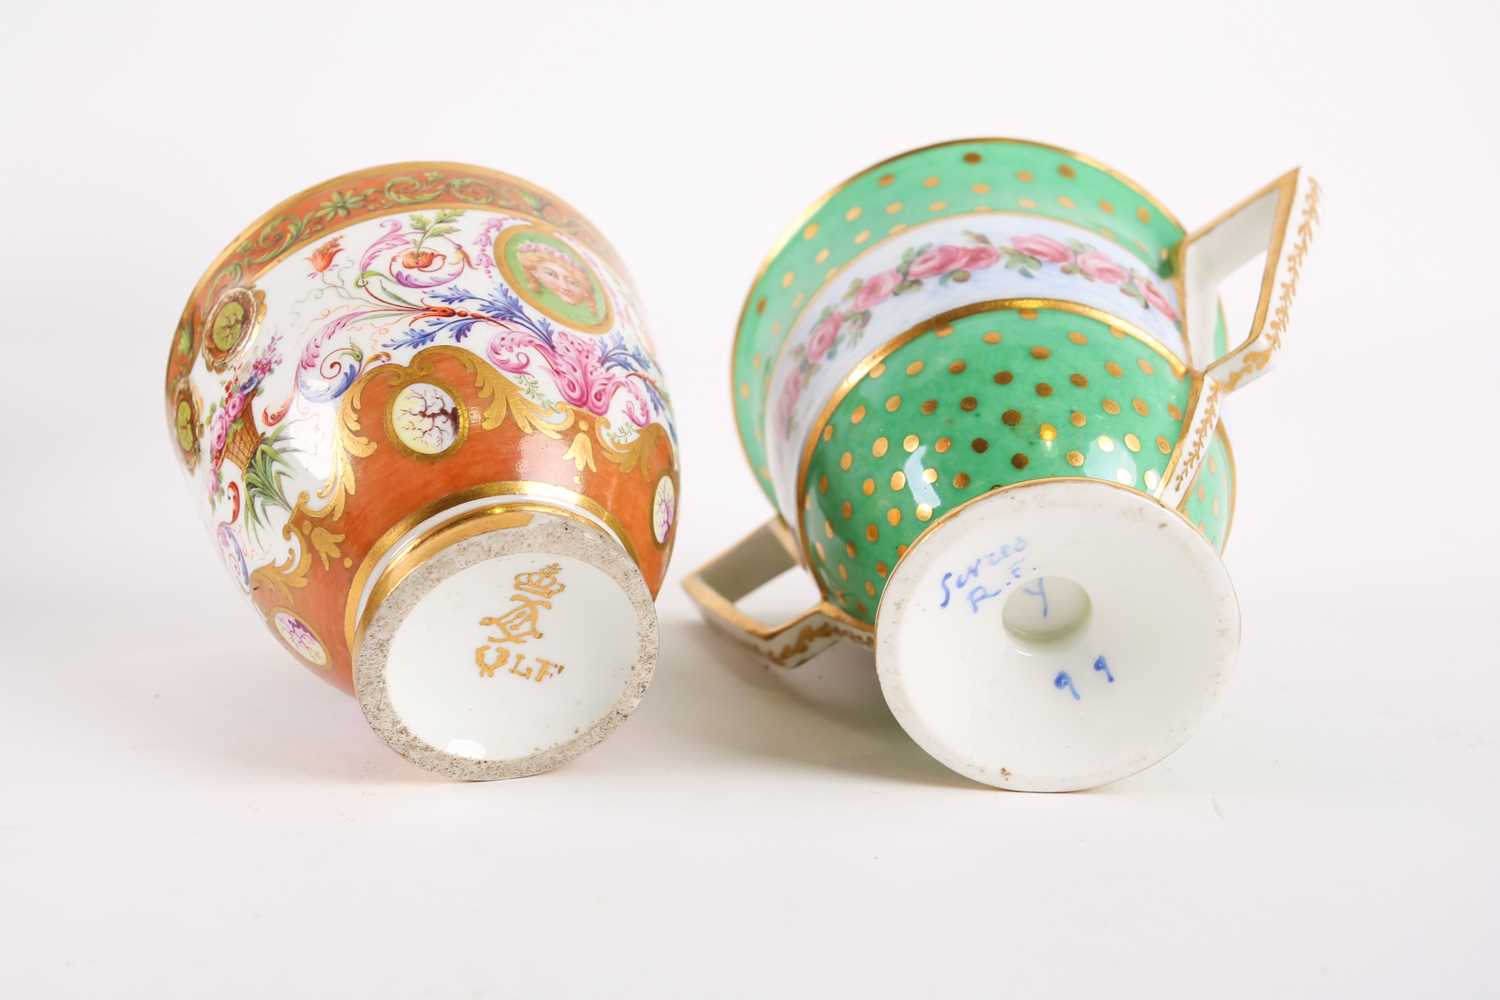 A late 18th century Serves two handled cup, with a raised central band decorated with roses and - Image 2 of 14